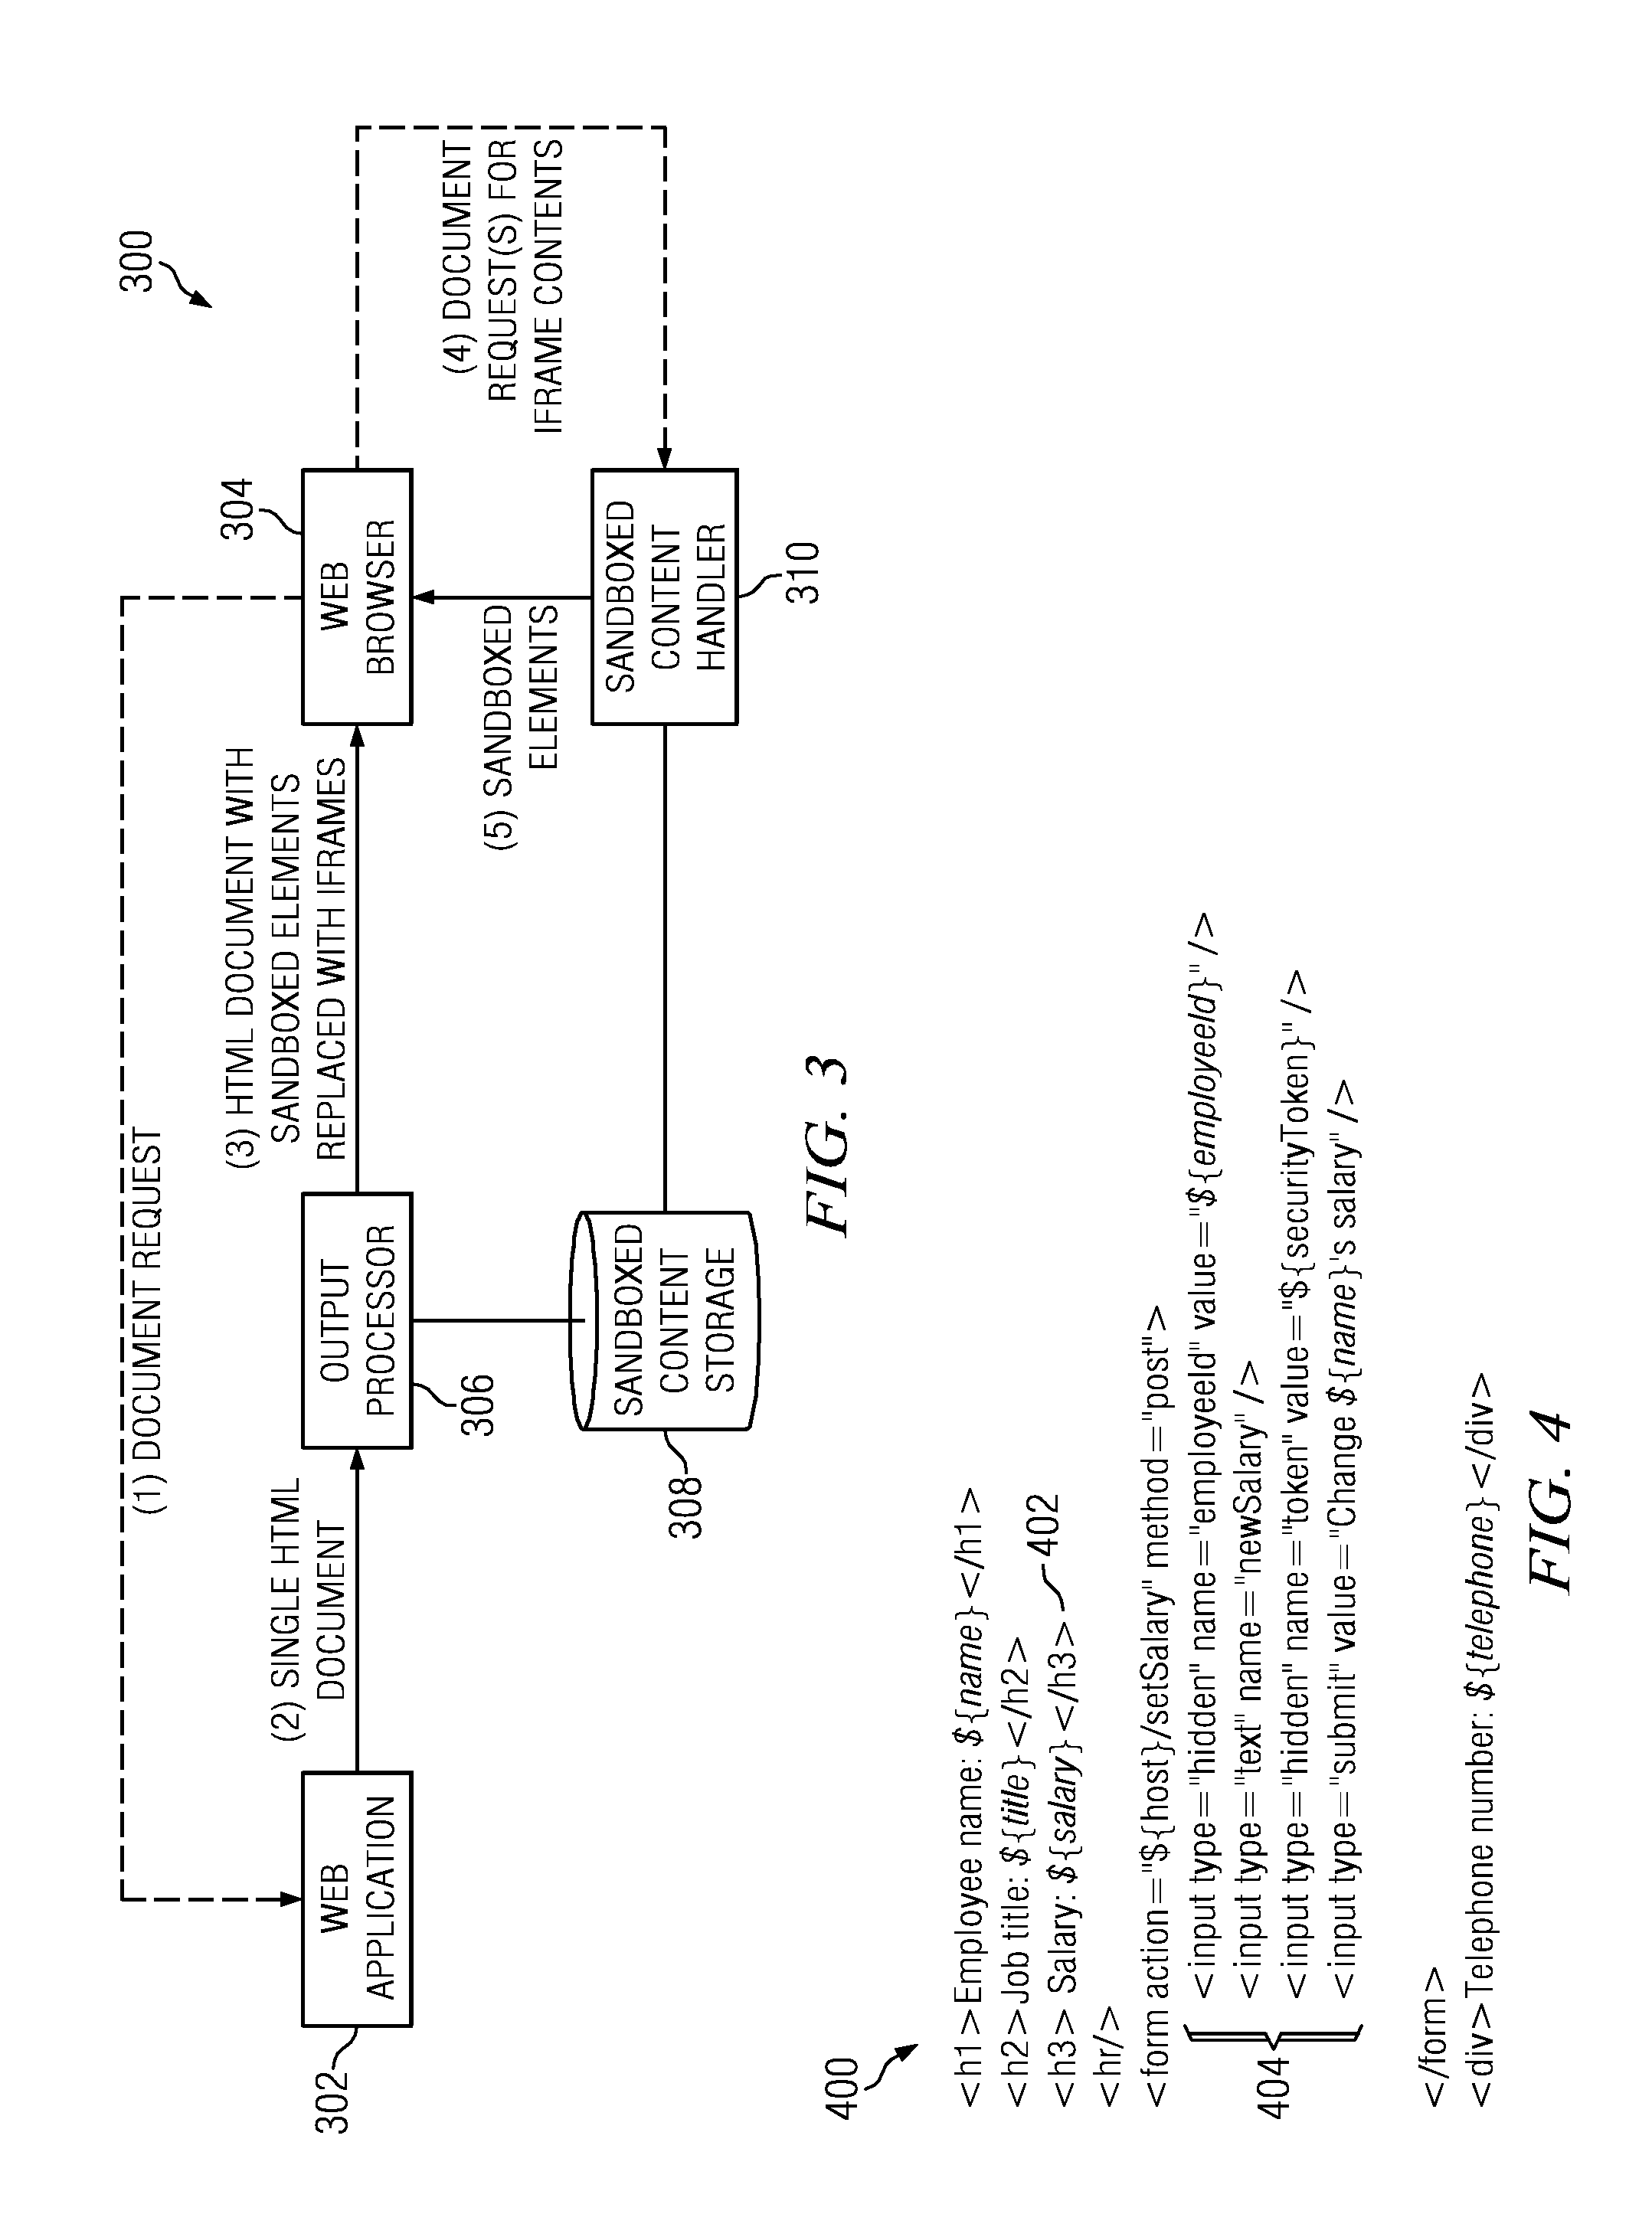 Method and apparatus for serving content elements of a markup language document protected against cross-site scripting attack